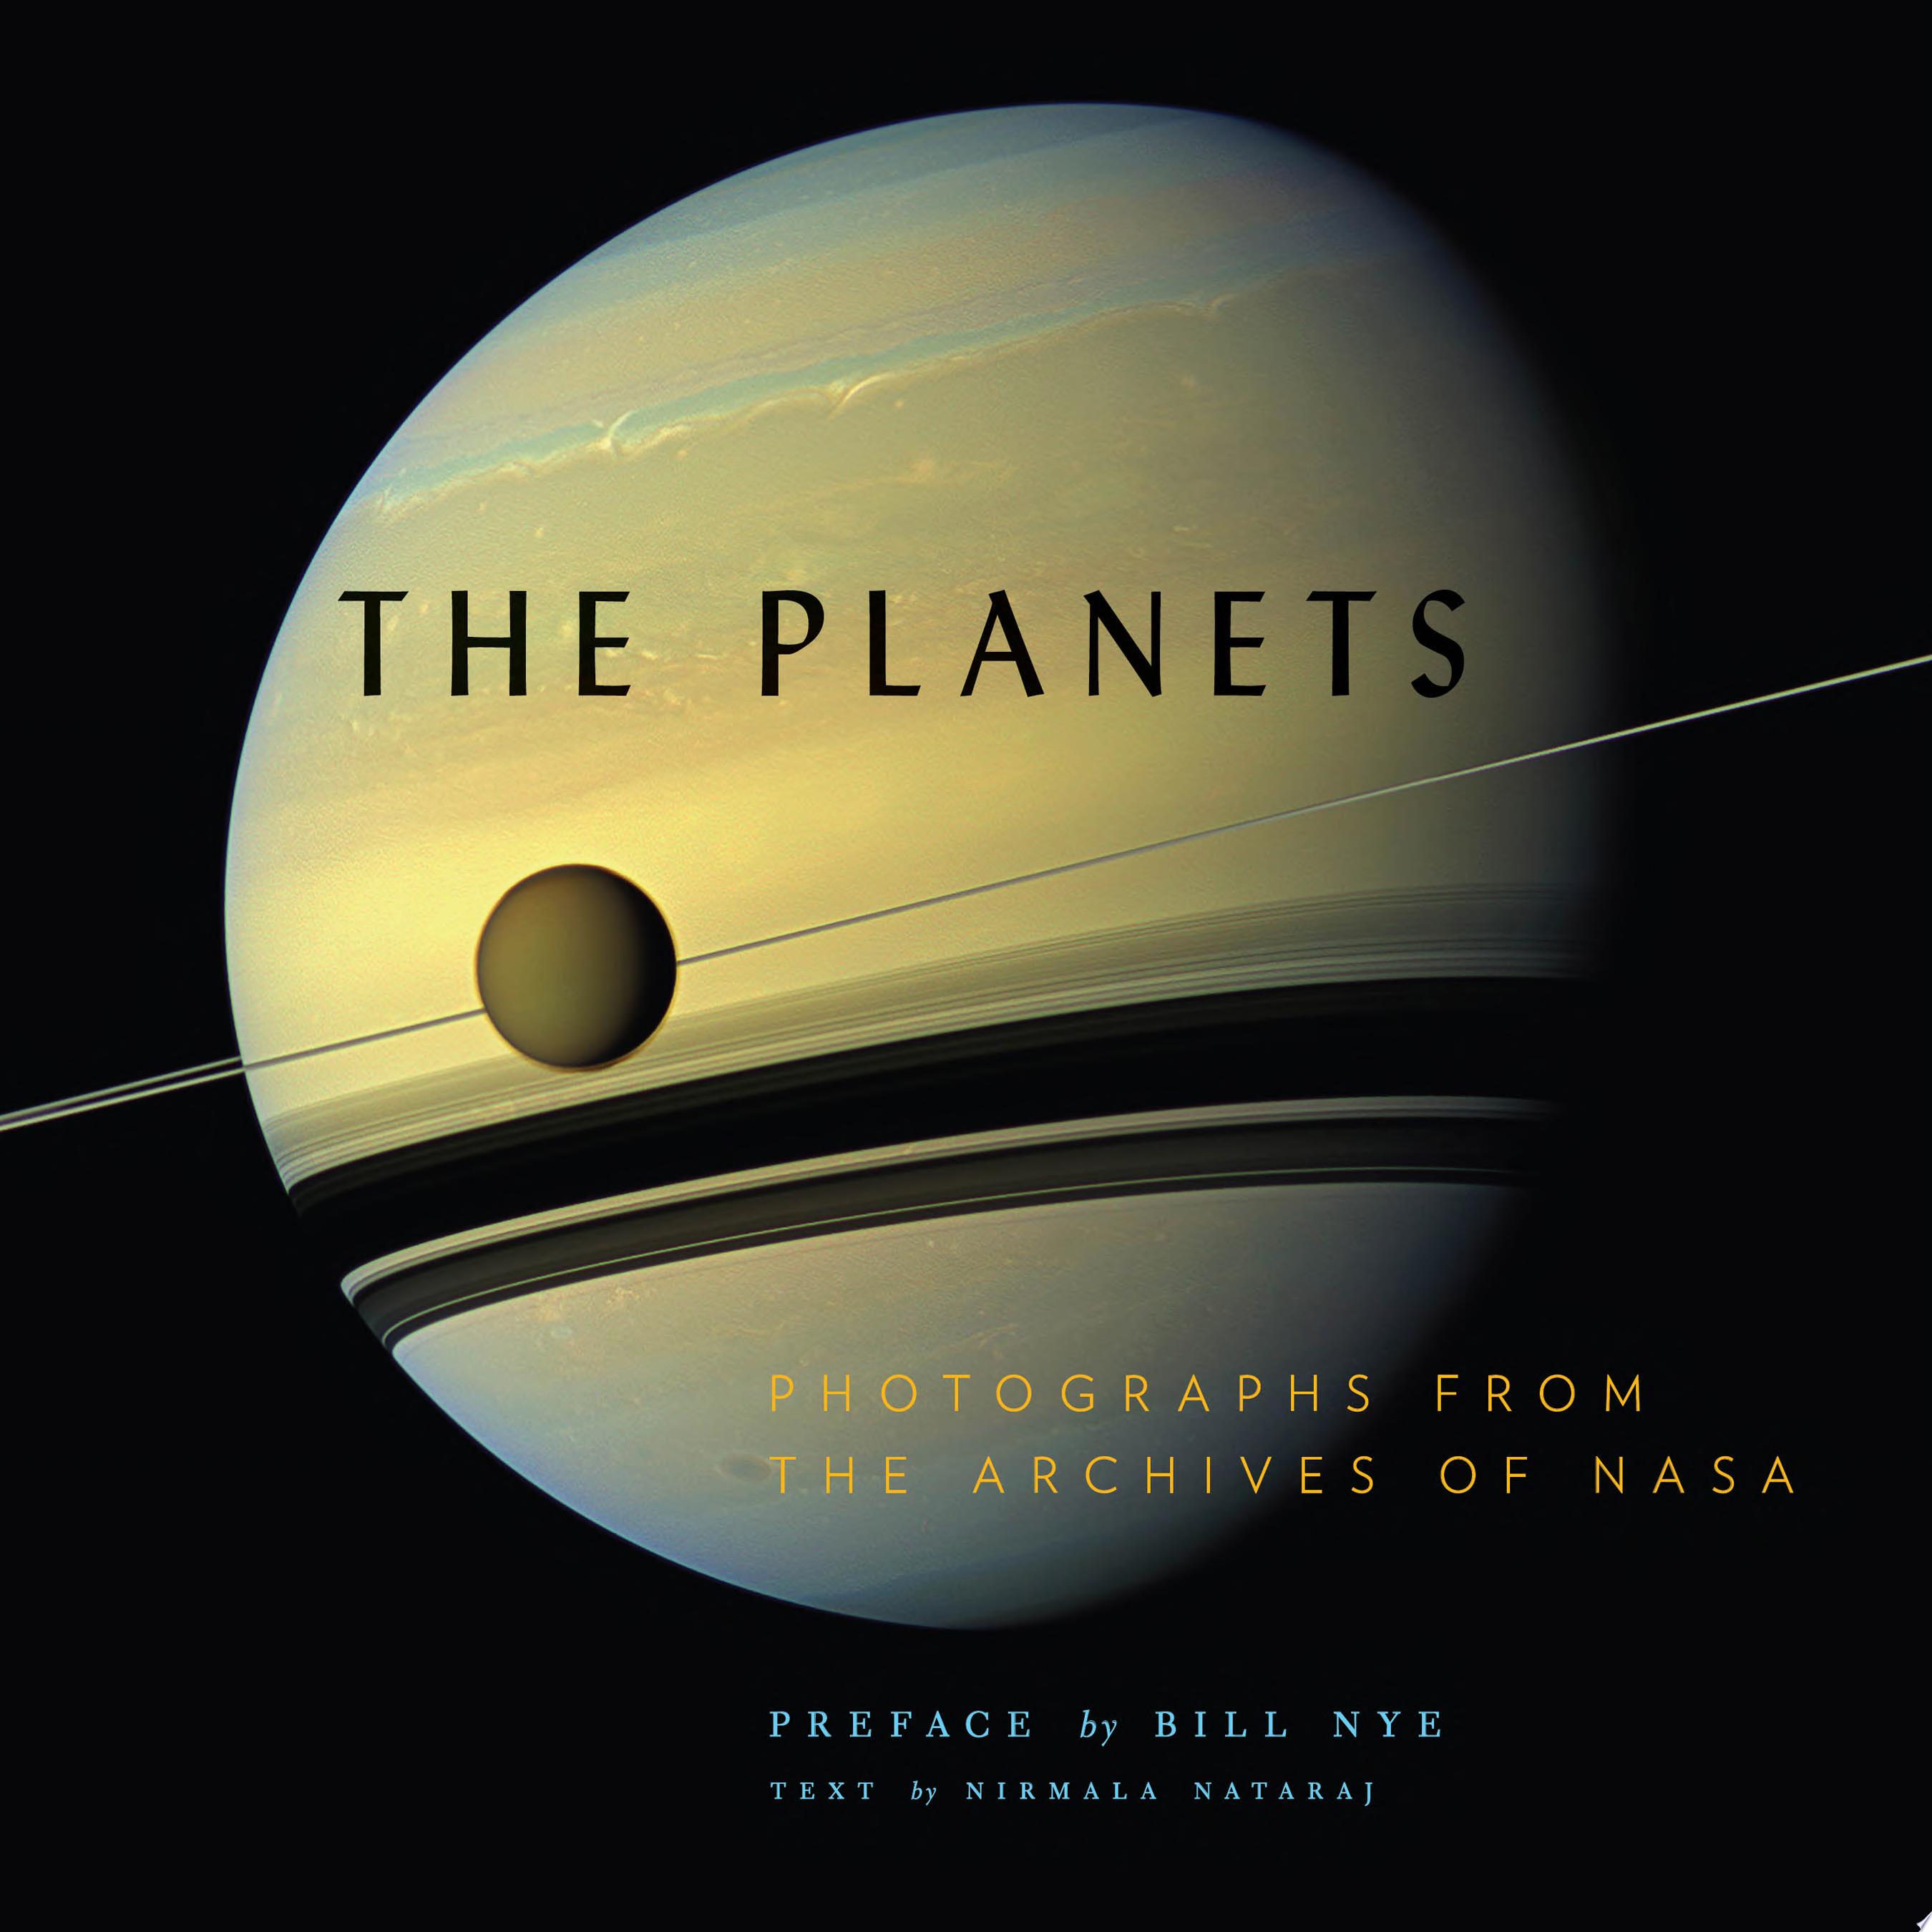 Image for "The Planets"